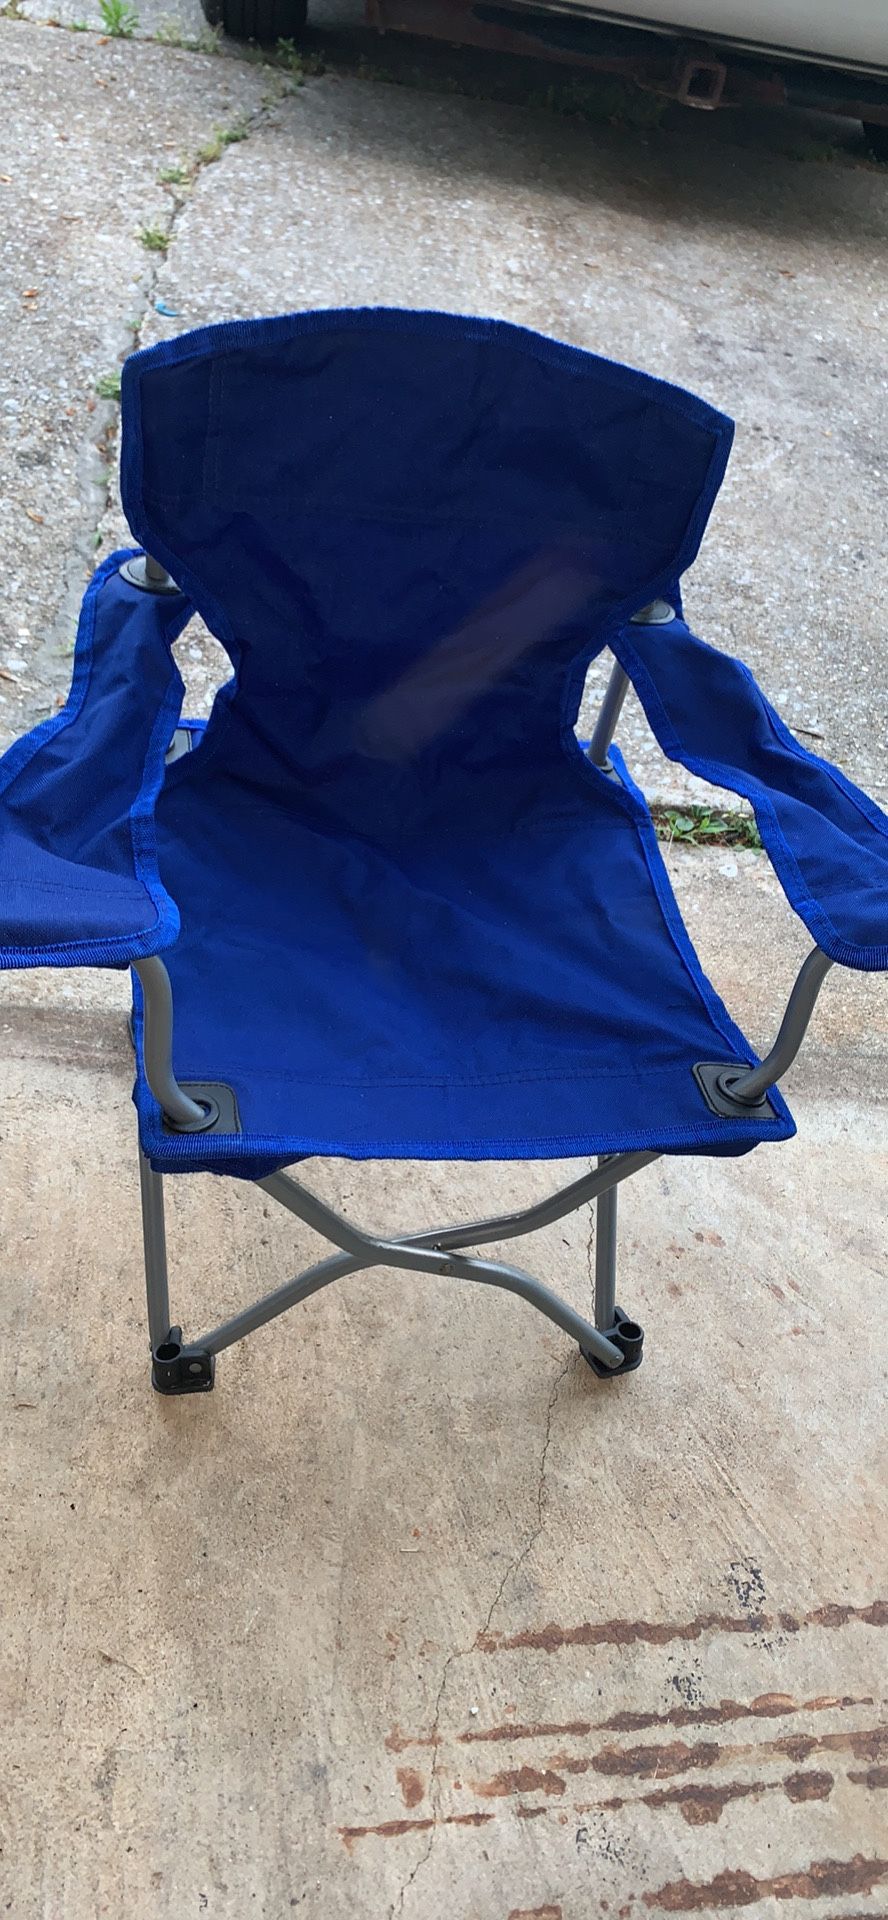 Folding chair for kids